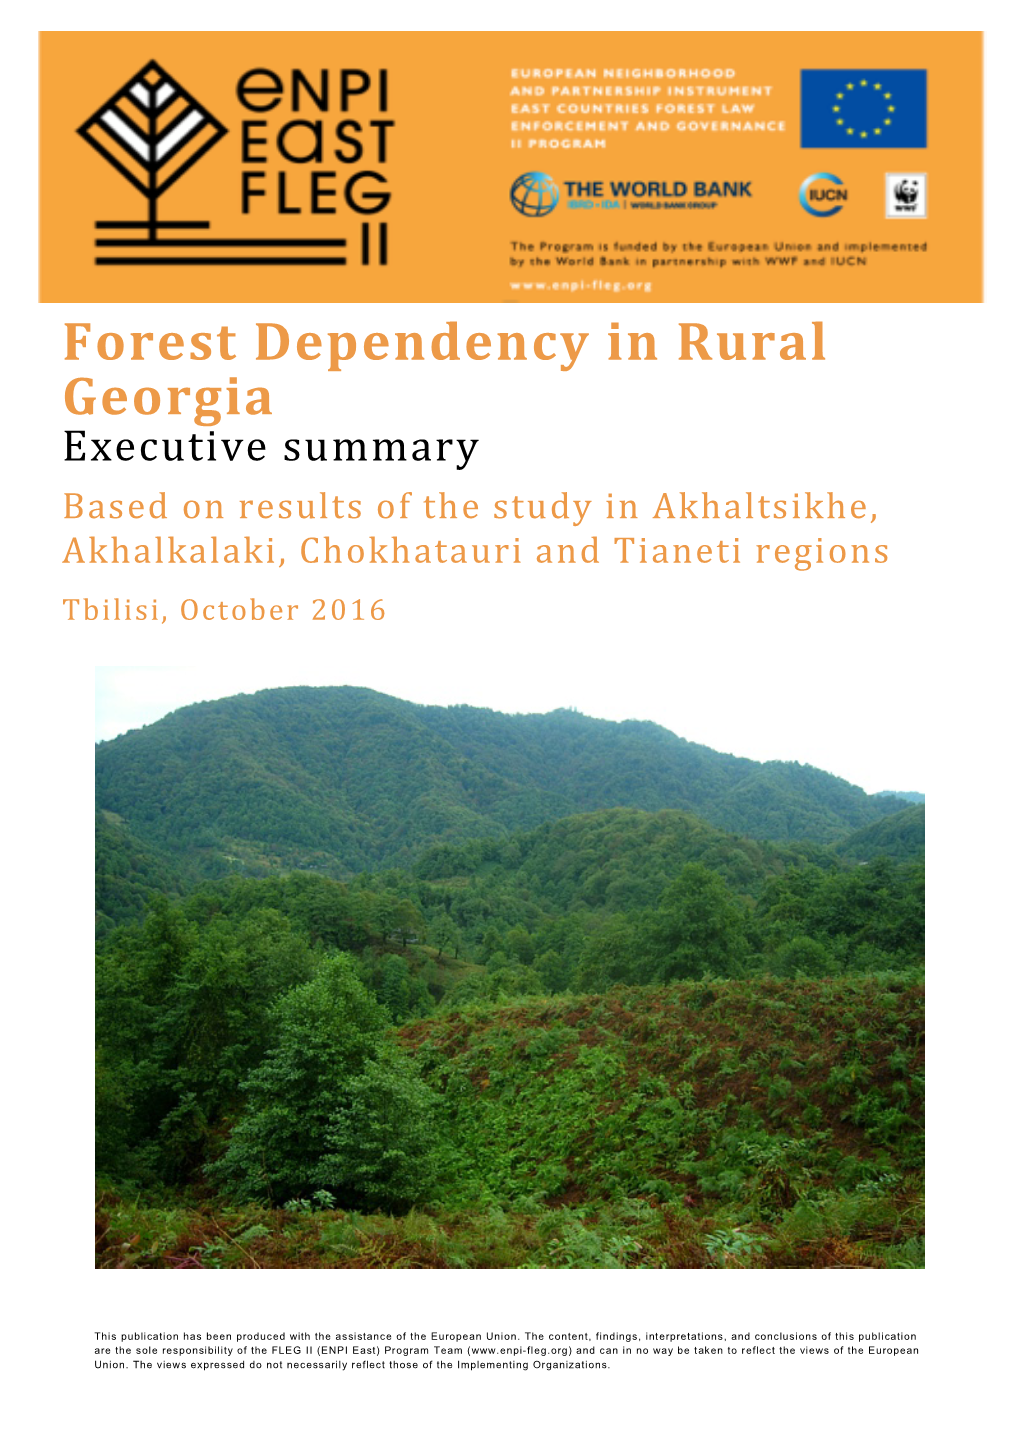 Forest Dependency in Rural Georgia Executive Summary